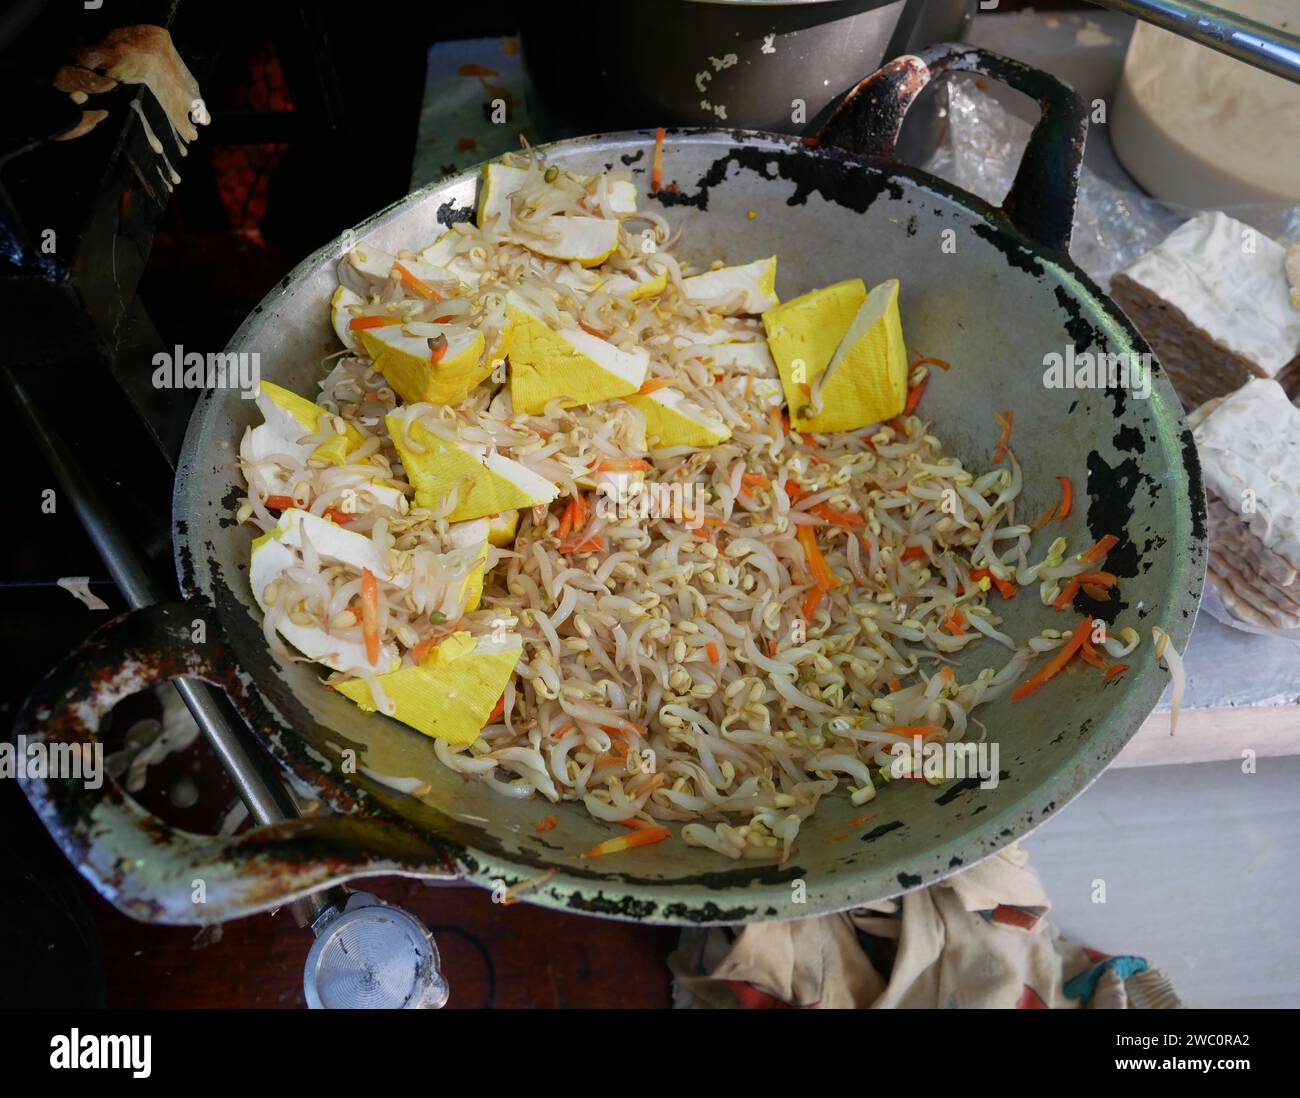 A street food wok with tahu isi or deep fried tofu snacks with fillings cooking in Bandung, West Java, Indonesia. Stock Photo